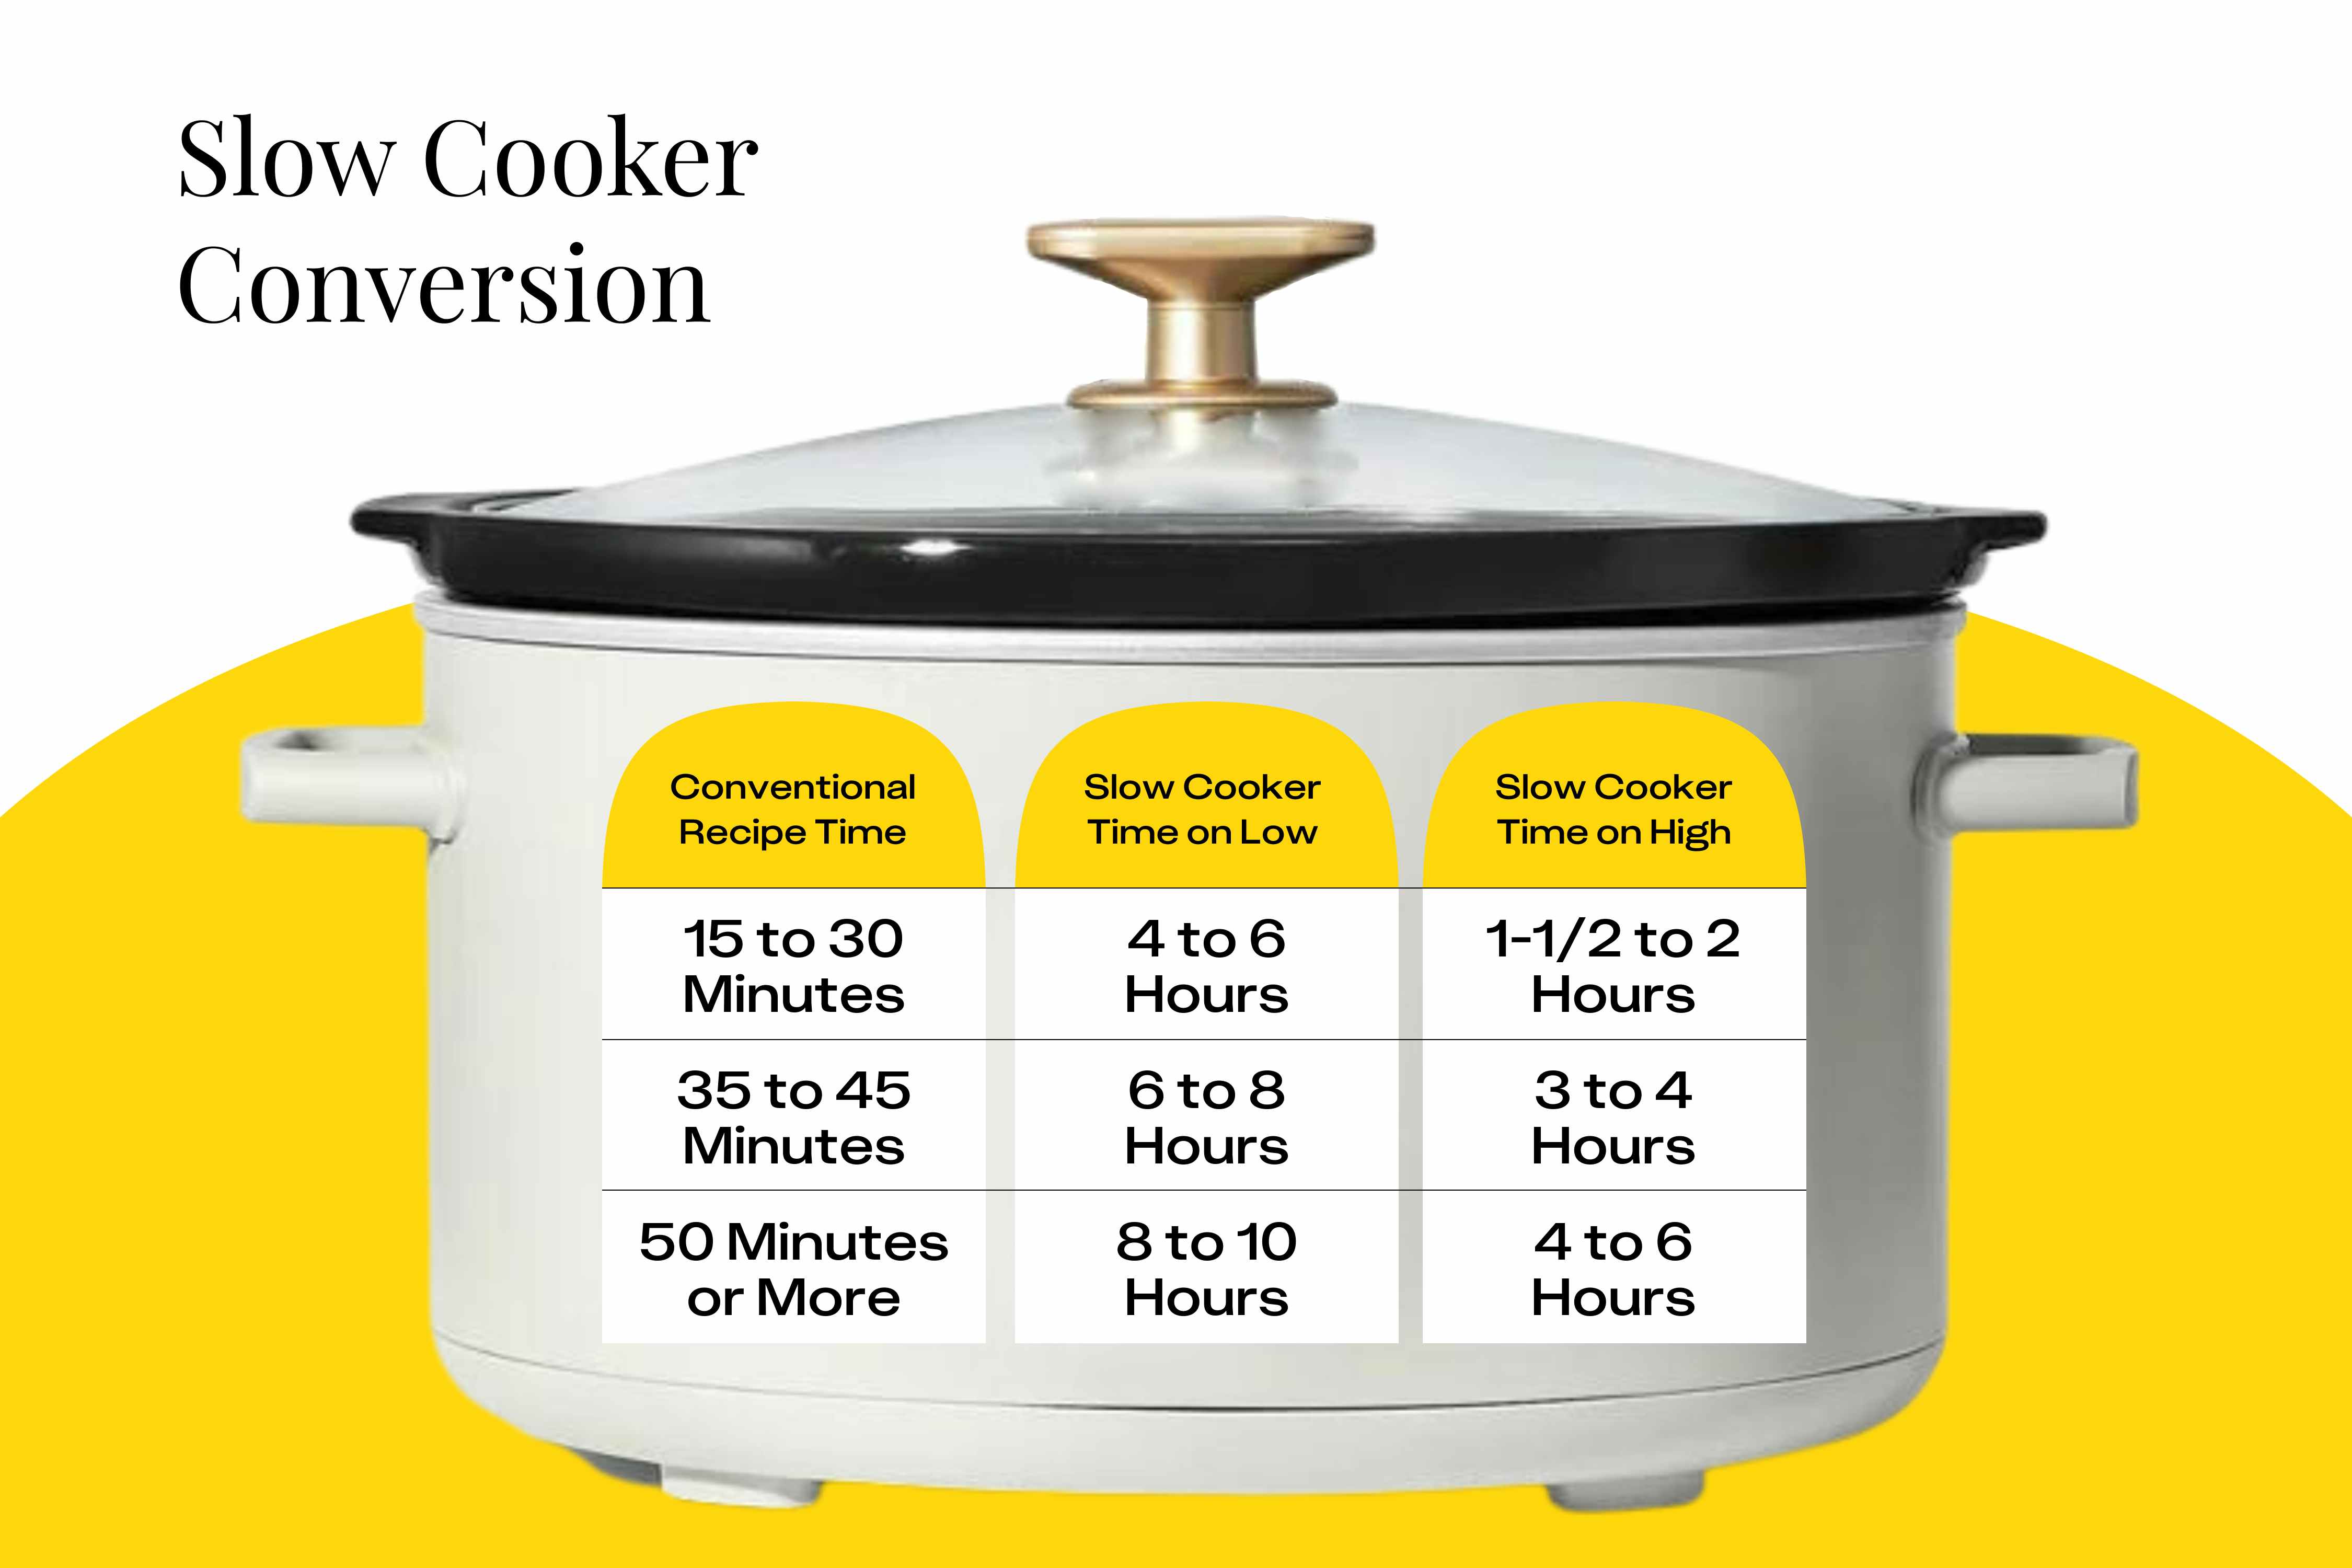 https://prod-cdn-thekrazycouponlady.imgix.net/wp-content/uploads/2016/10/slow-cooker-conversion-edit-1699298606-1699298606.png?auto=format&fit=fill&q=25